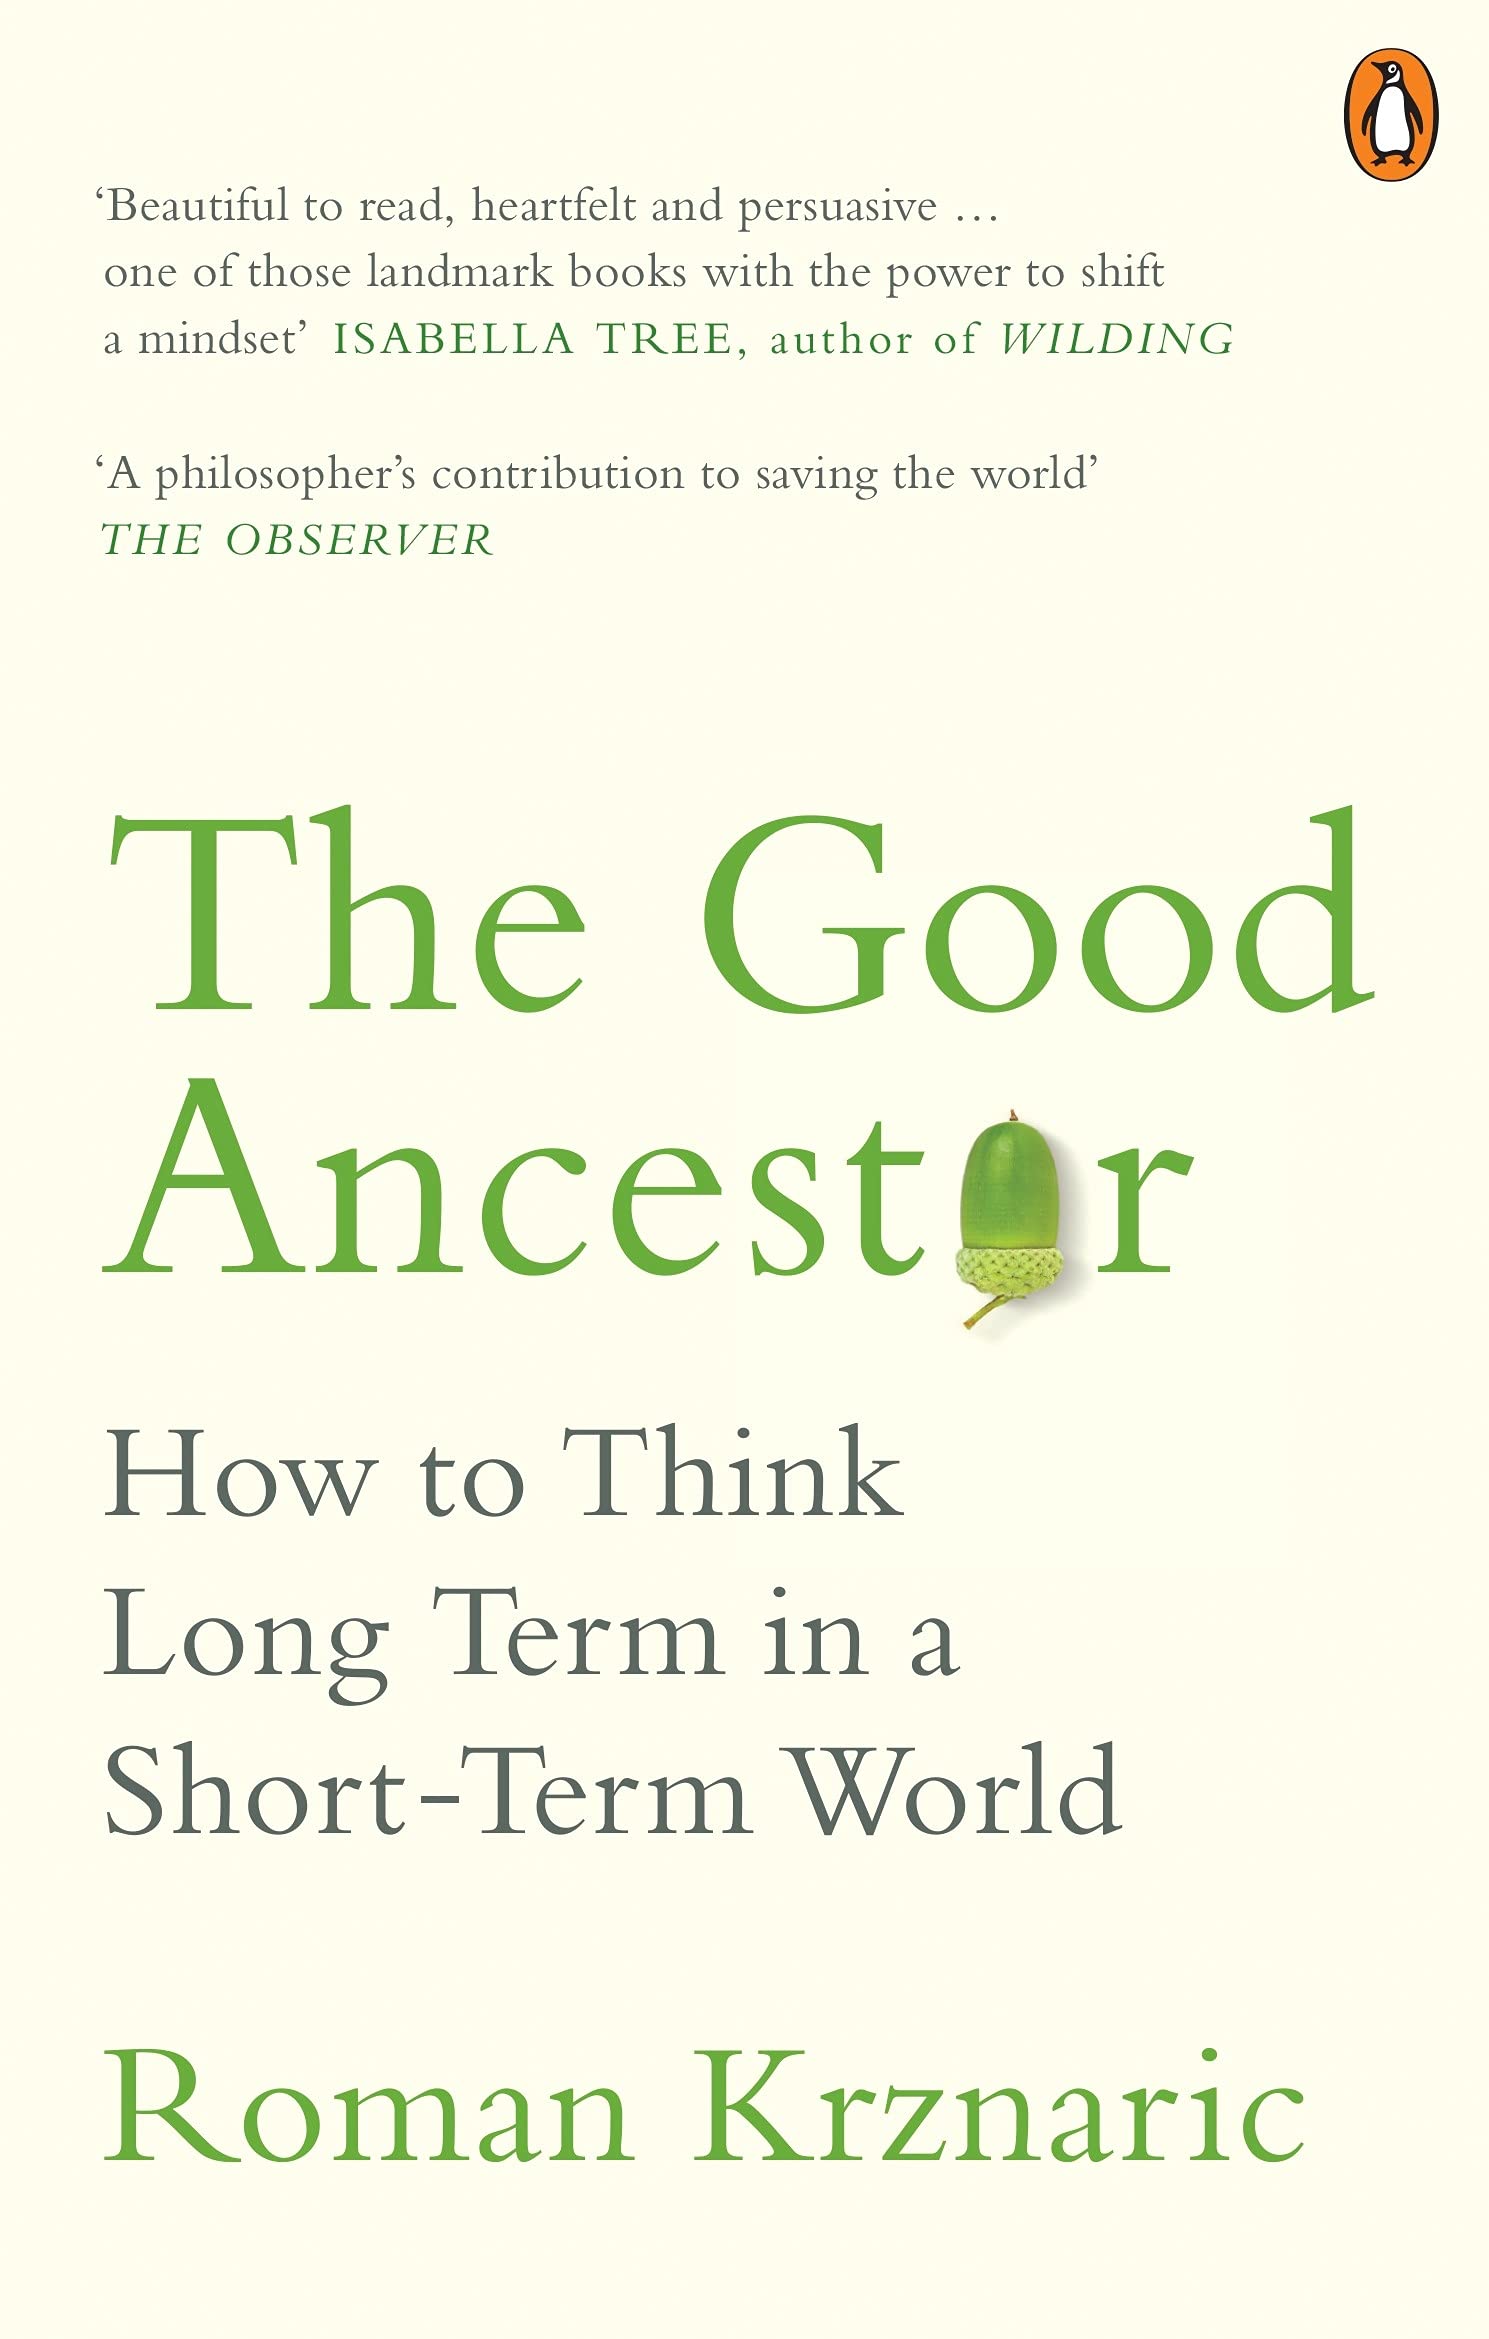 The Good Ancestor: How to Think Long Term in a Short-Term World by Roman Krznaric.